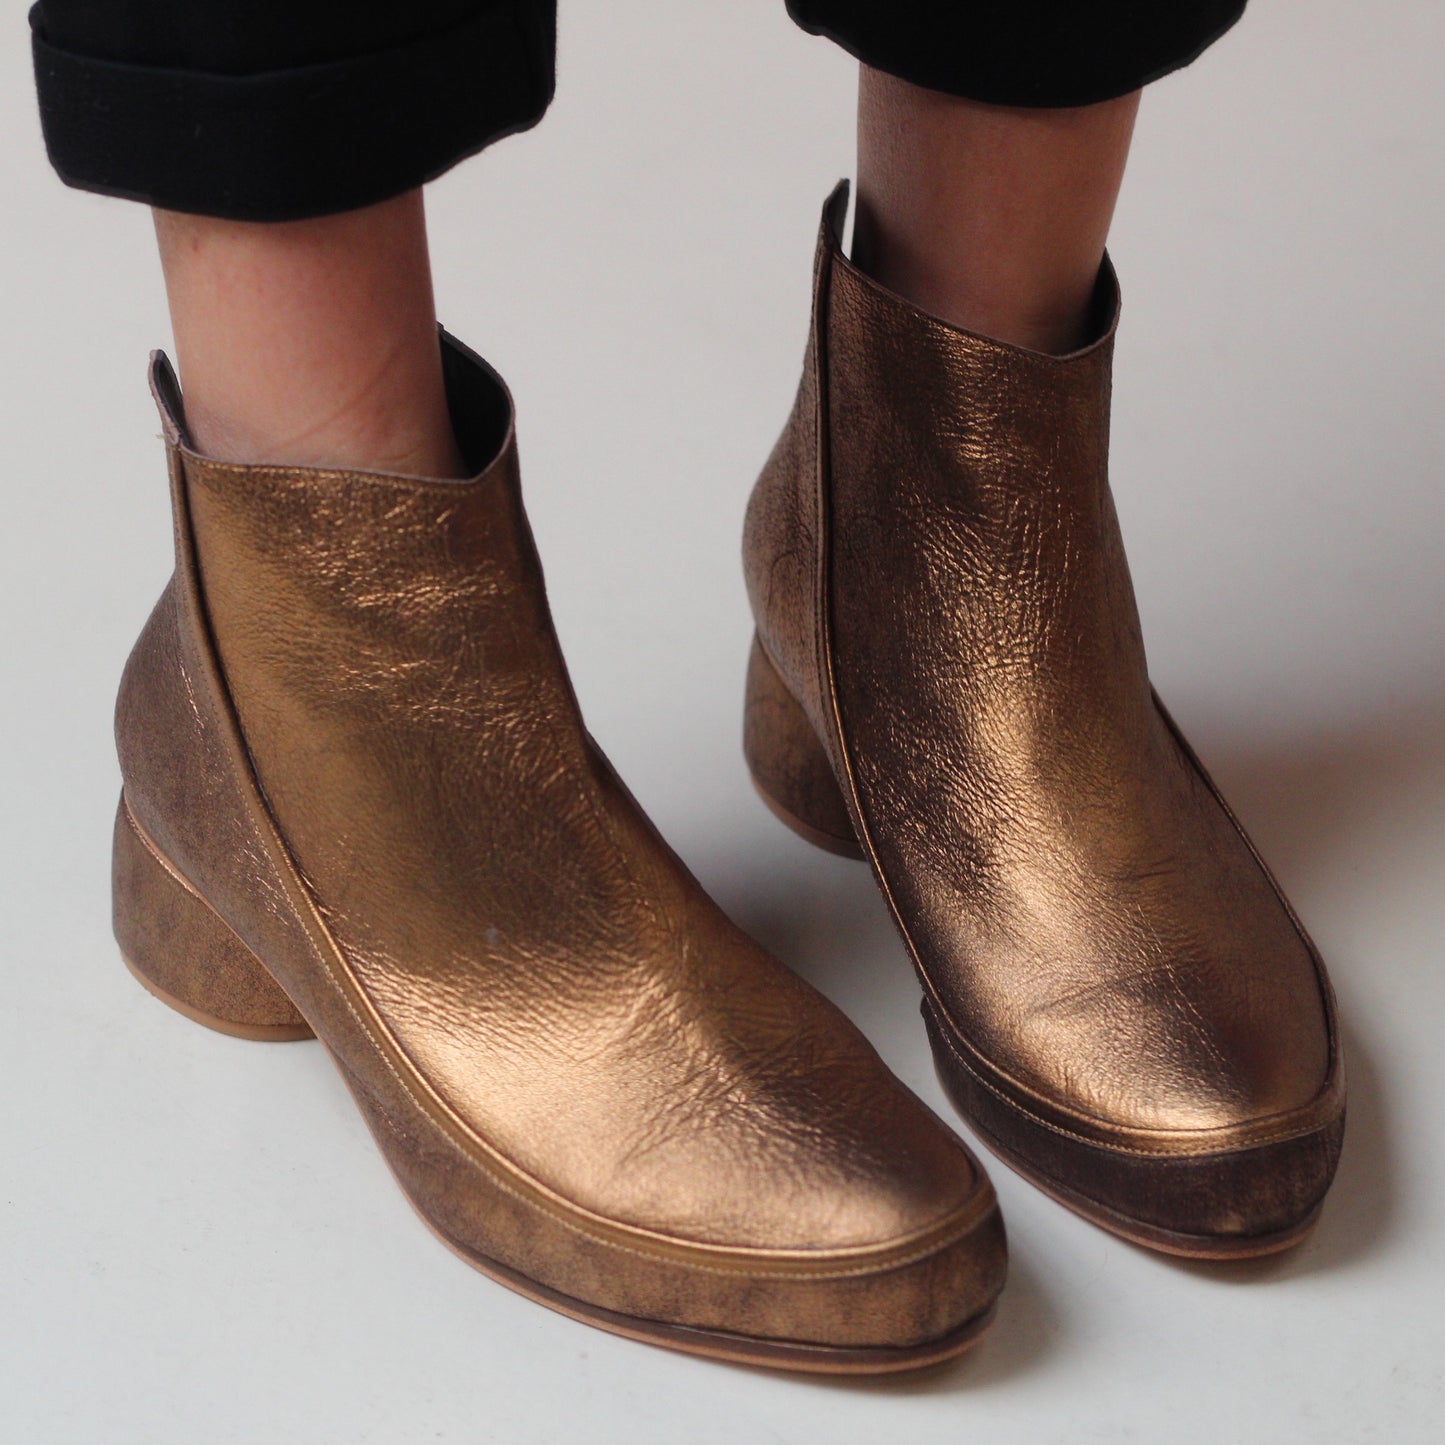 Aphrodite Gold Ankle Boots